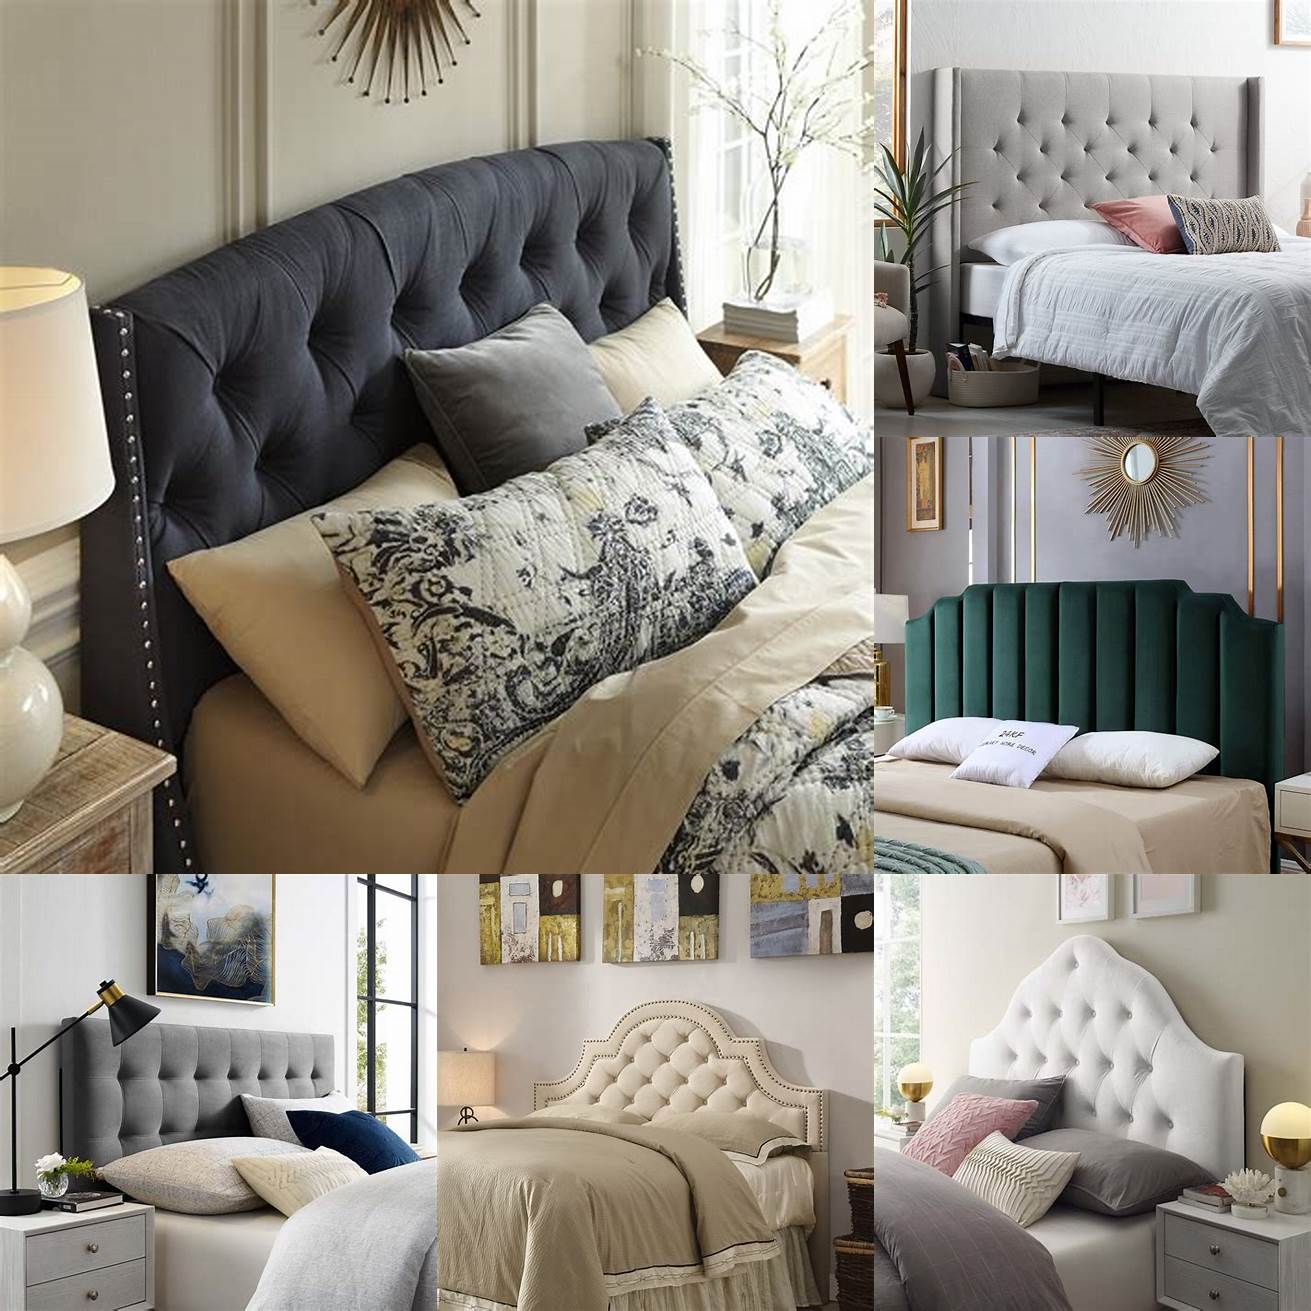 Upholstered headboard with tufted design